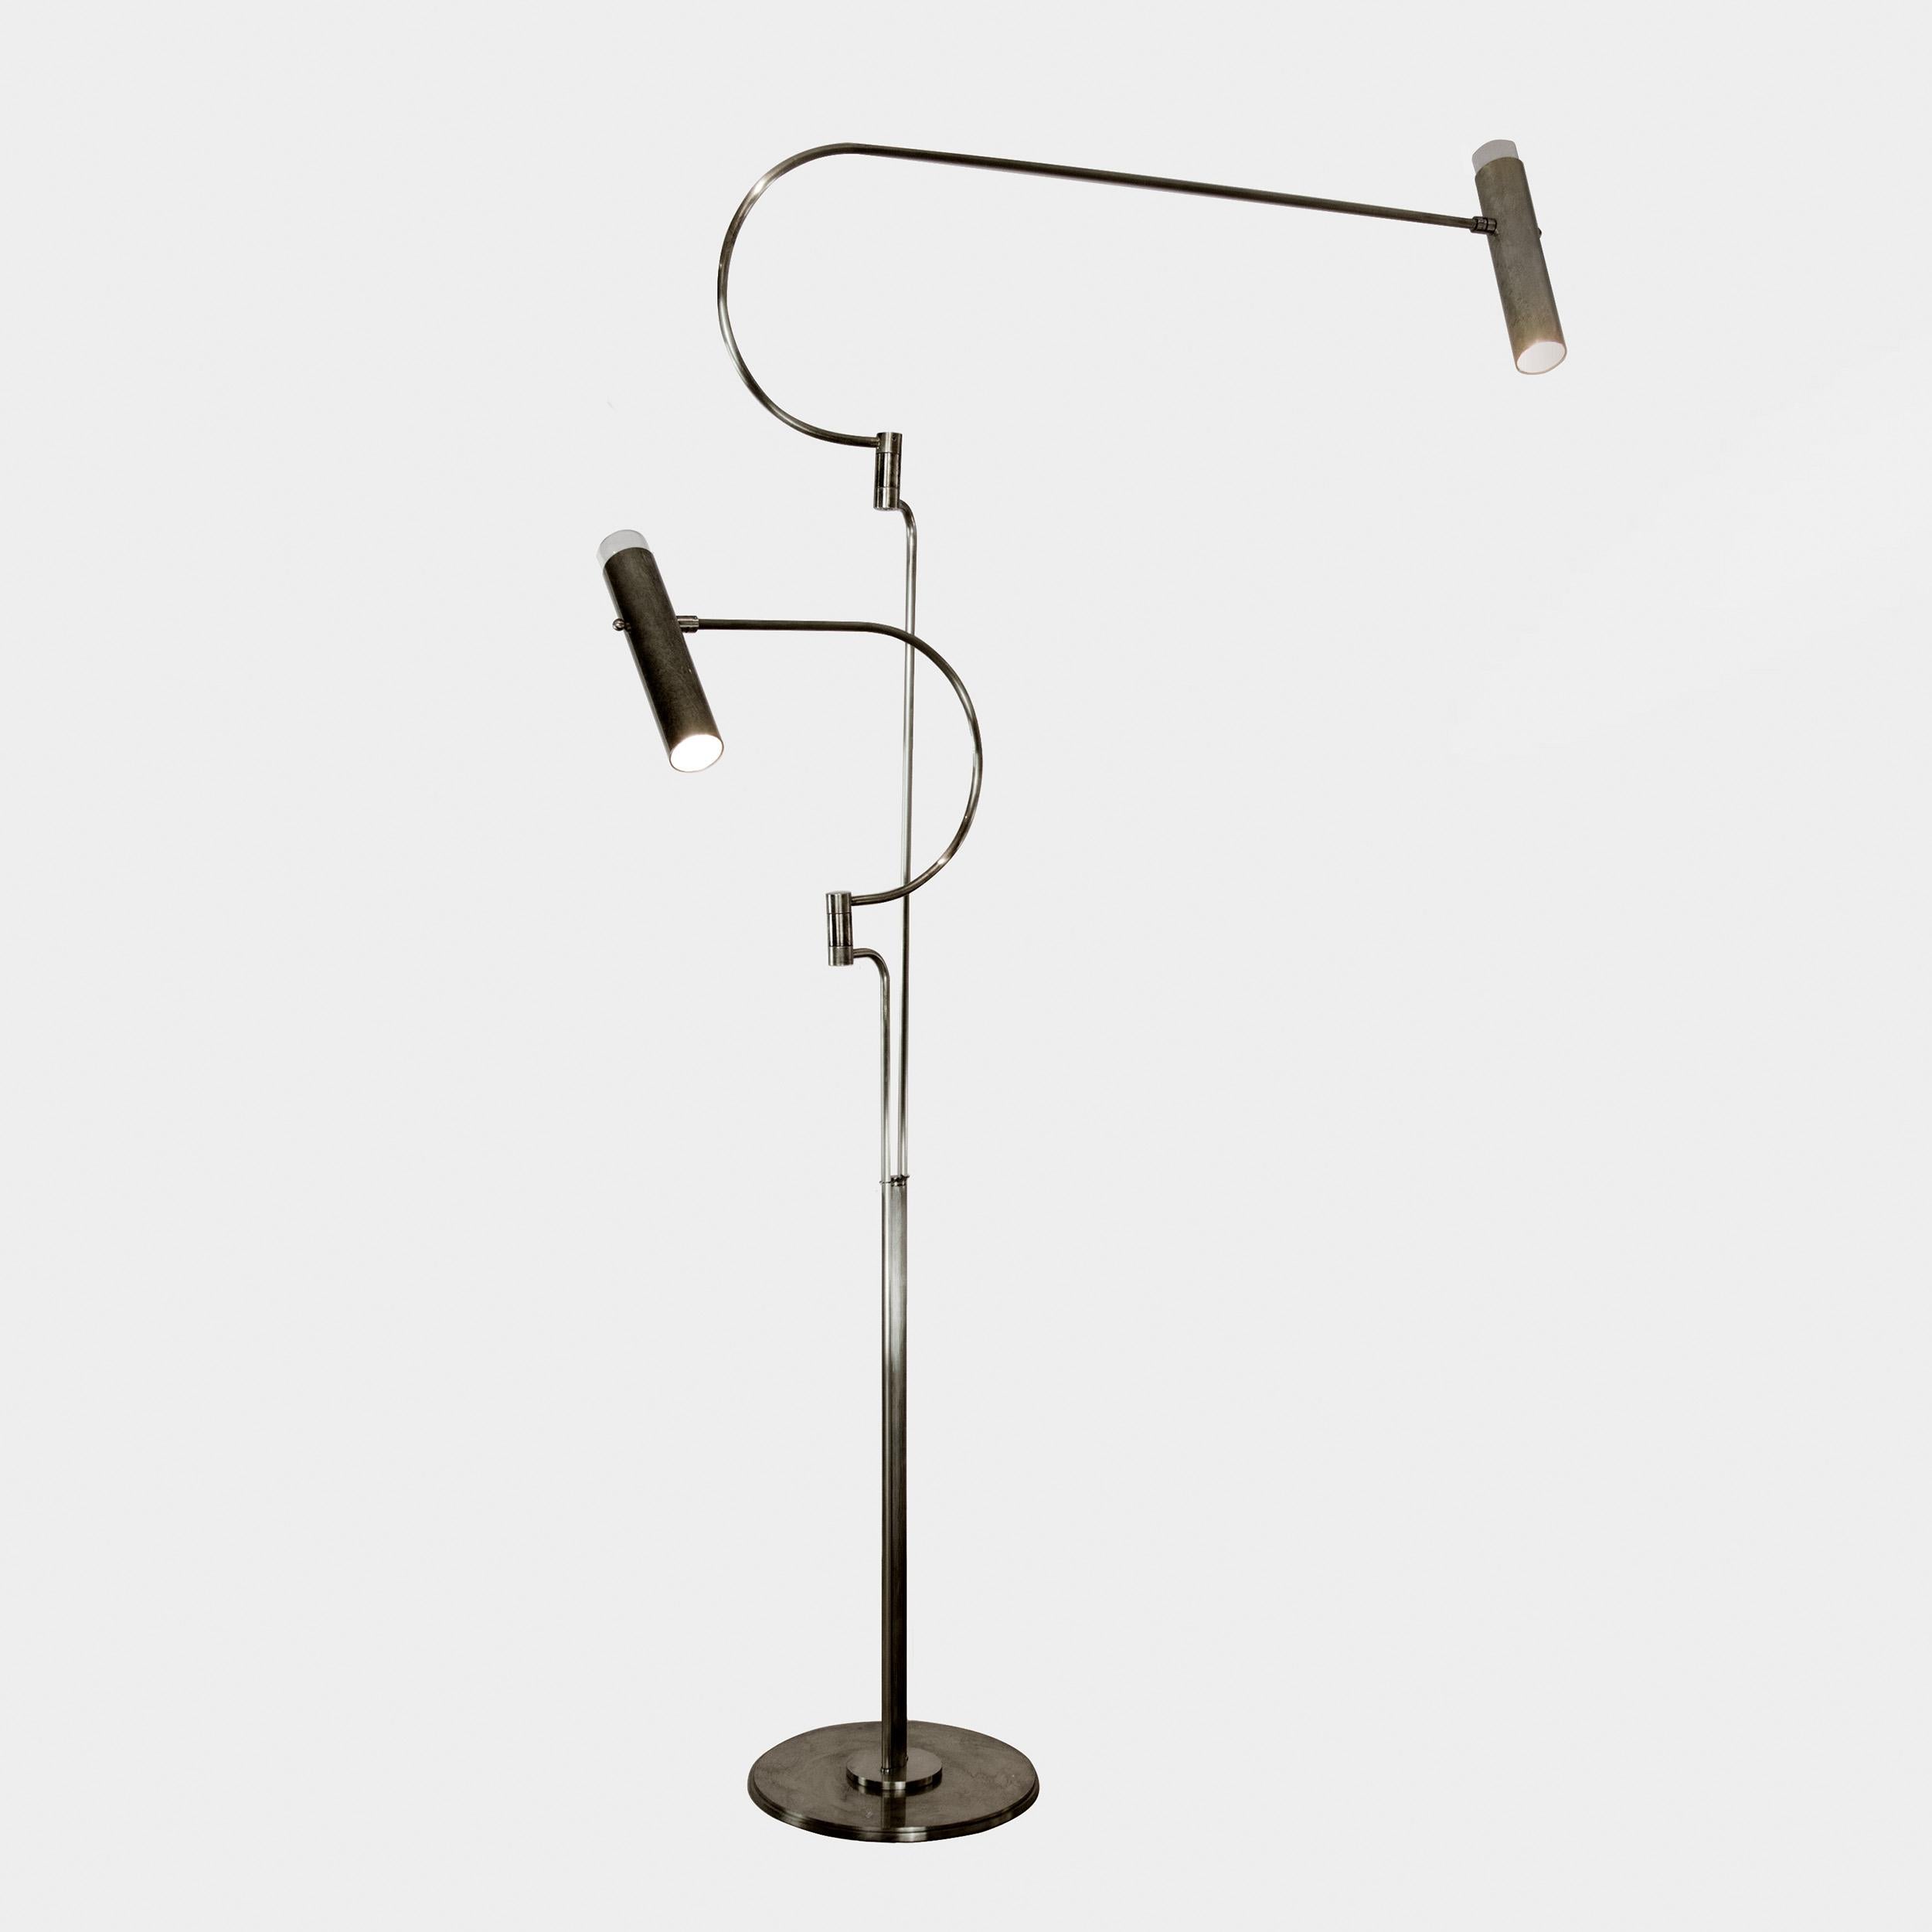 Black Nickel Southside Floor Lamp by Andrea Bonini
Limited Edition
Dimensions: Ø 30 x H 160 cm.
Materials: Black glossy nickel galvanic and transparent glass.

Limited series, numbered and signed pieces. Custom size or finish on request.  Also